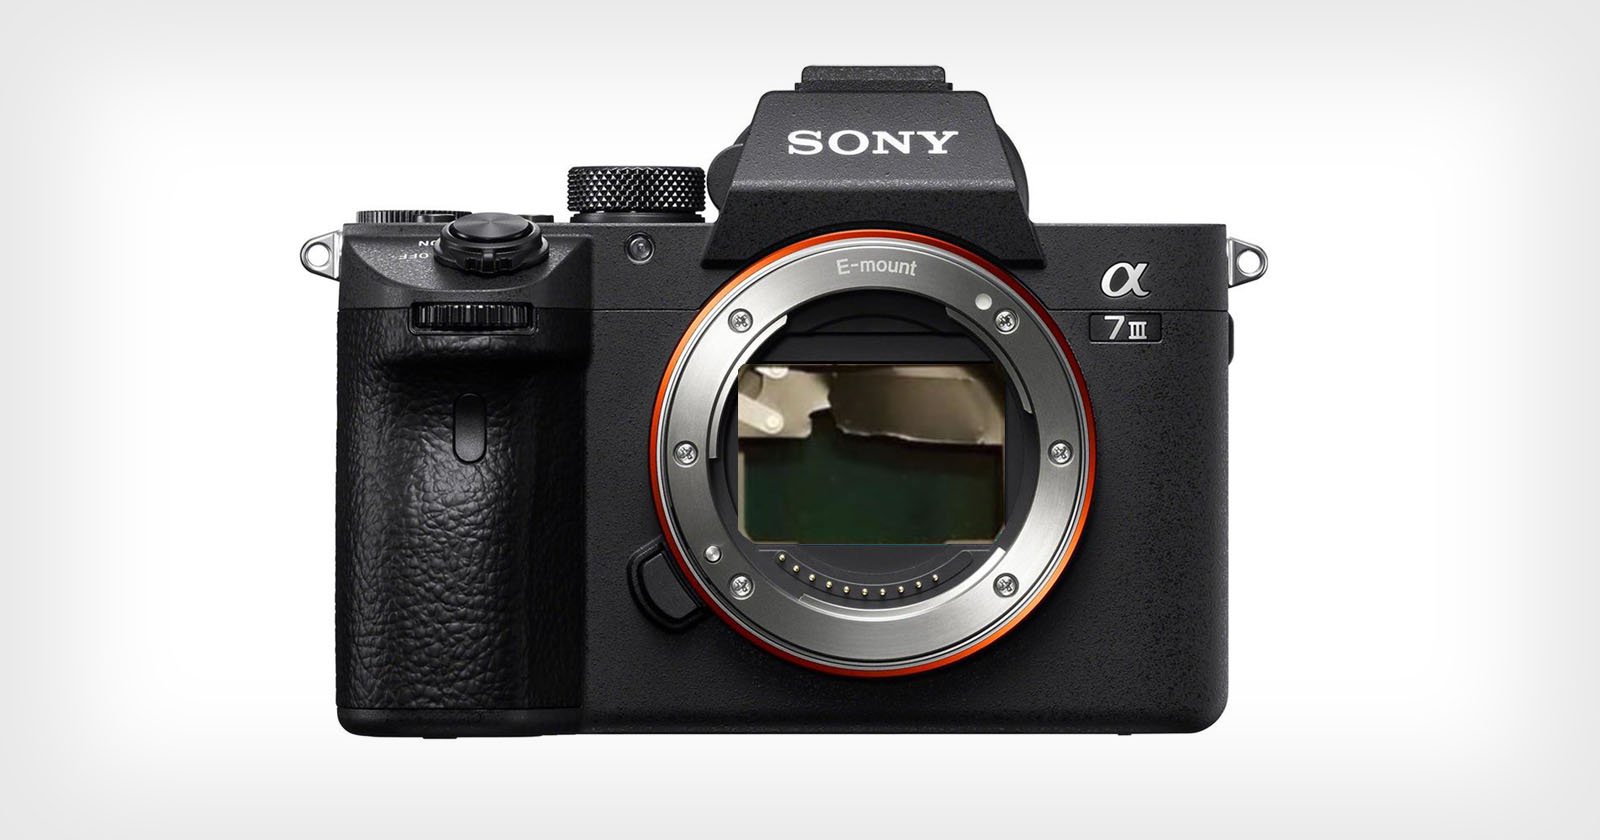 The class action says the a7 III shutter is destroying the cameras